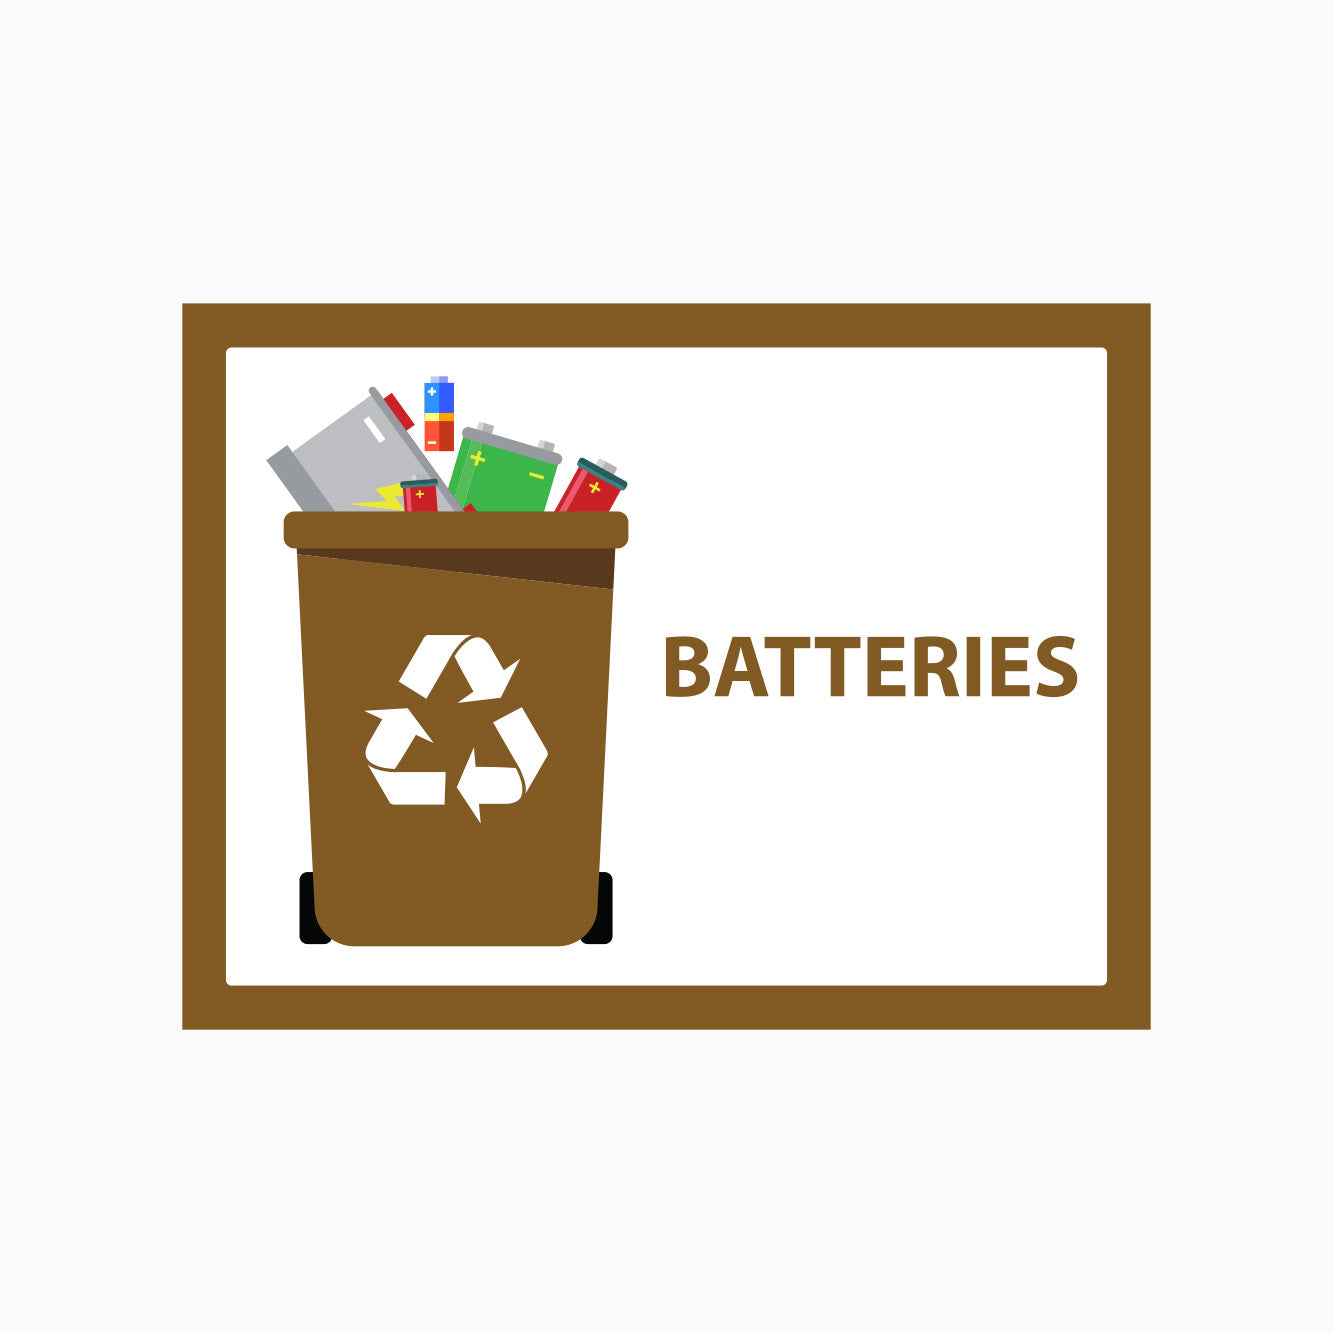 BATTERIES RECYCLE BIN SIGN